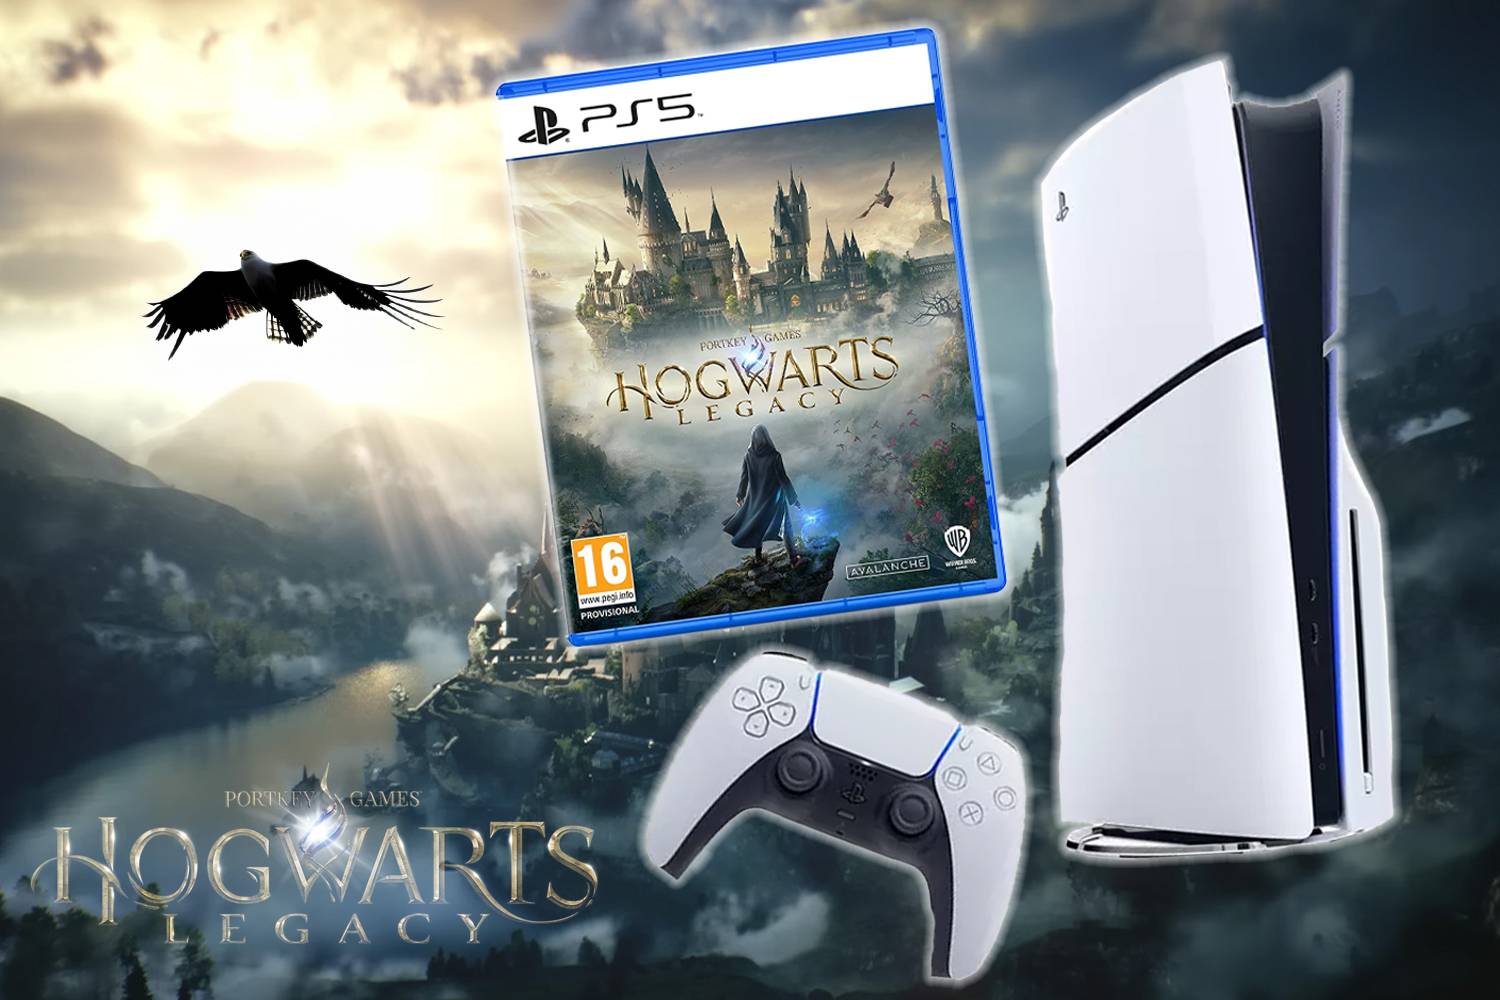 Win this PS5 Slim & Hogwarts Legacy - Only 999 Entries